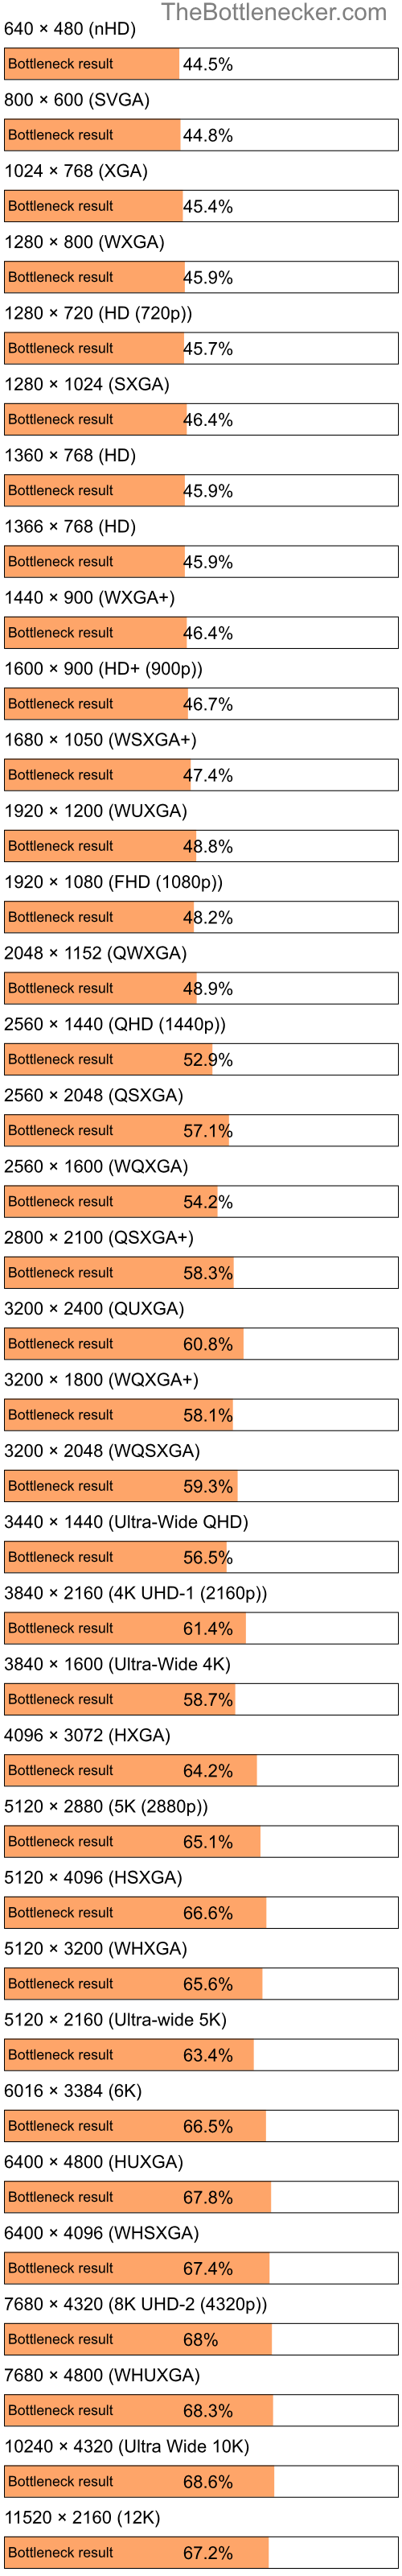 Bottleneck results by resolution for AMD Ryzen Threadripper PRO 7985WX and NVIDIA GeForce GTX 1650 in General Tasks